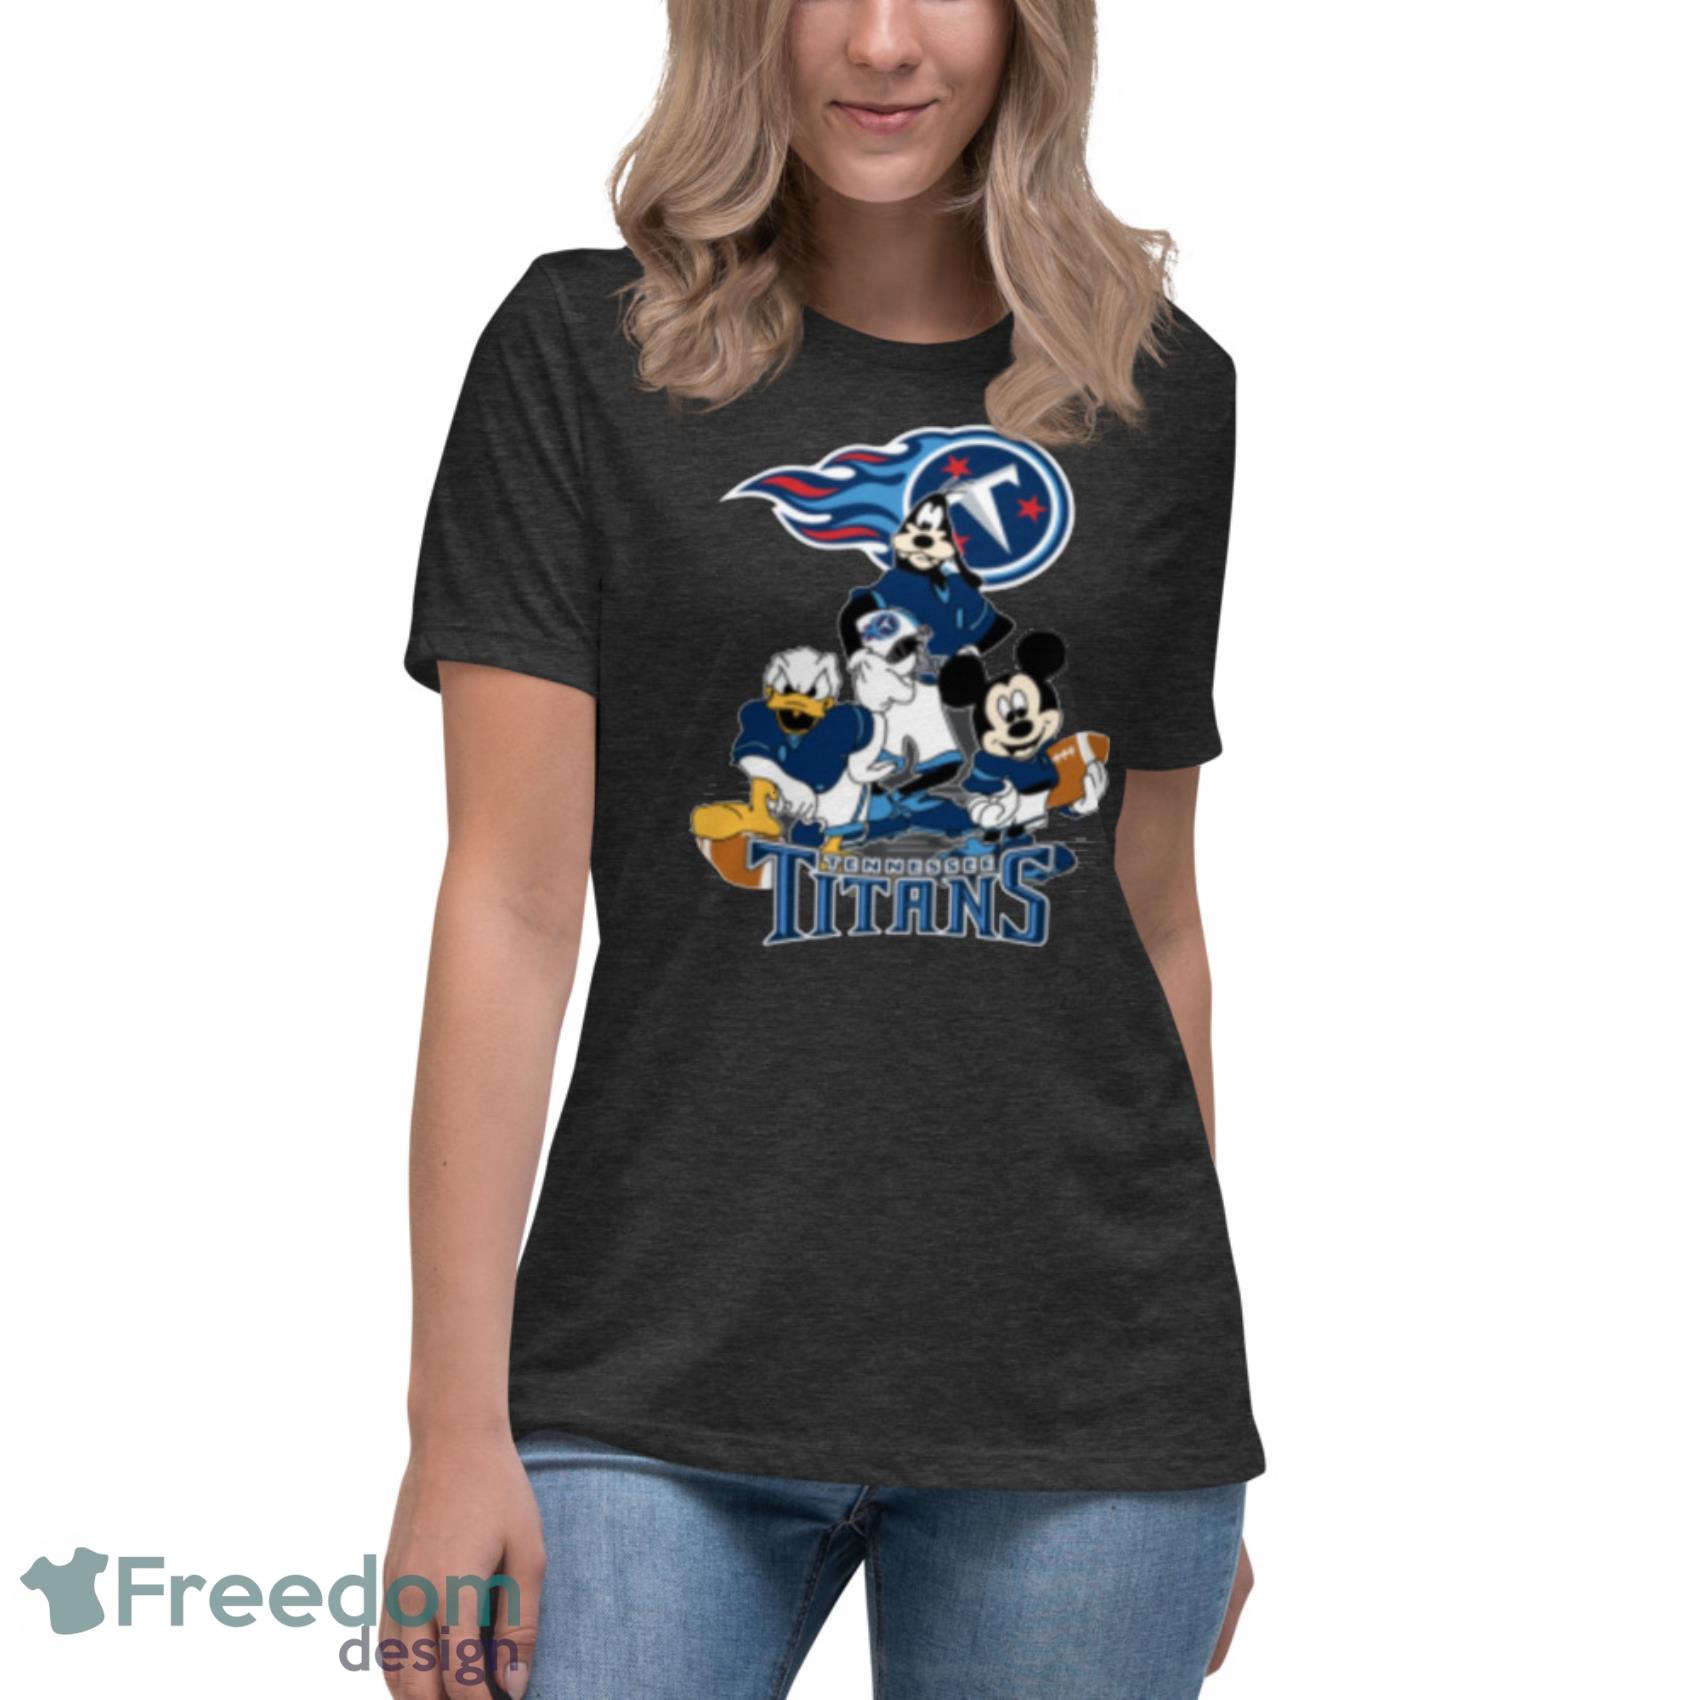 NFL Tennessee Titans Mickey Mouse Donald Duck Goofy Football Shirt T-Shirt  - Freedomdesign